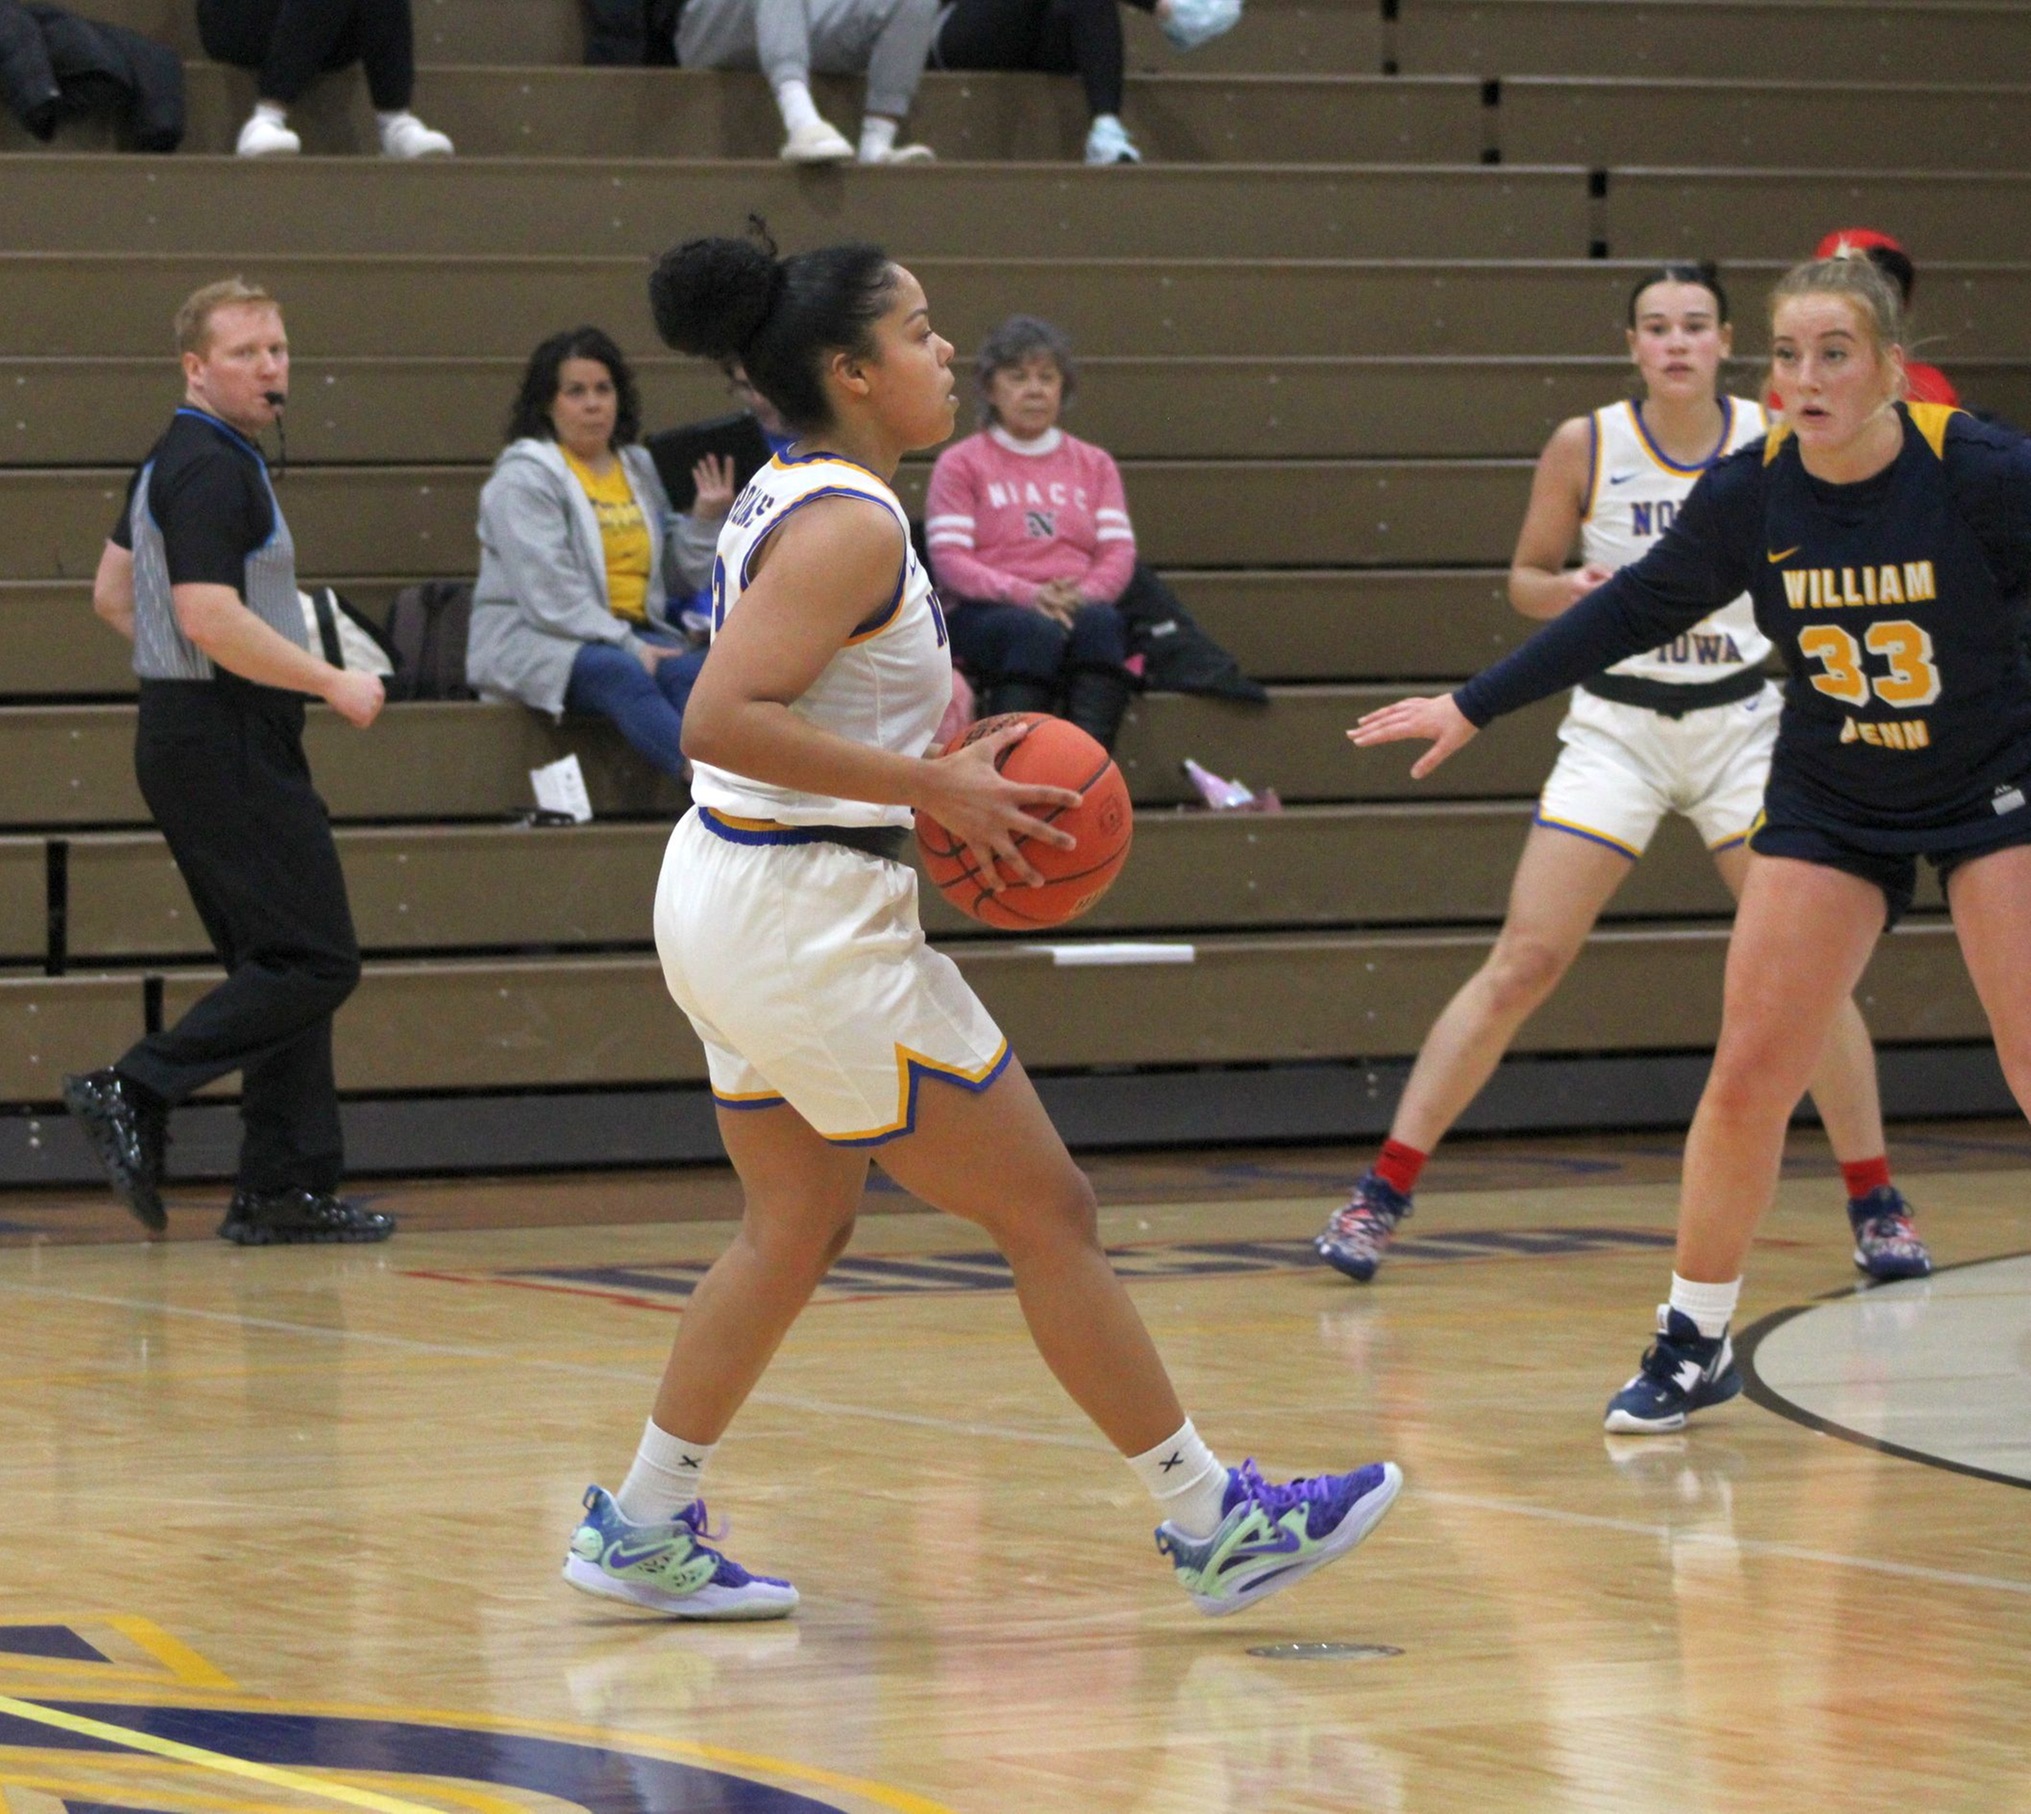 NIACC's Nariyah Parks scored a career-high 19 points in Thursday's win over the William Penn Junior Varsity.